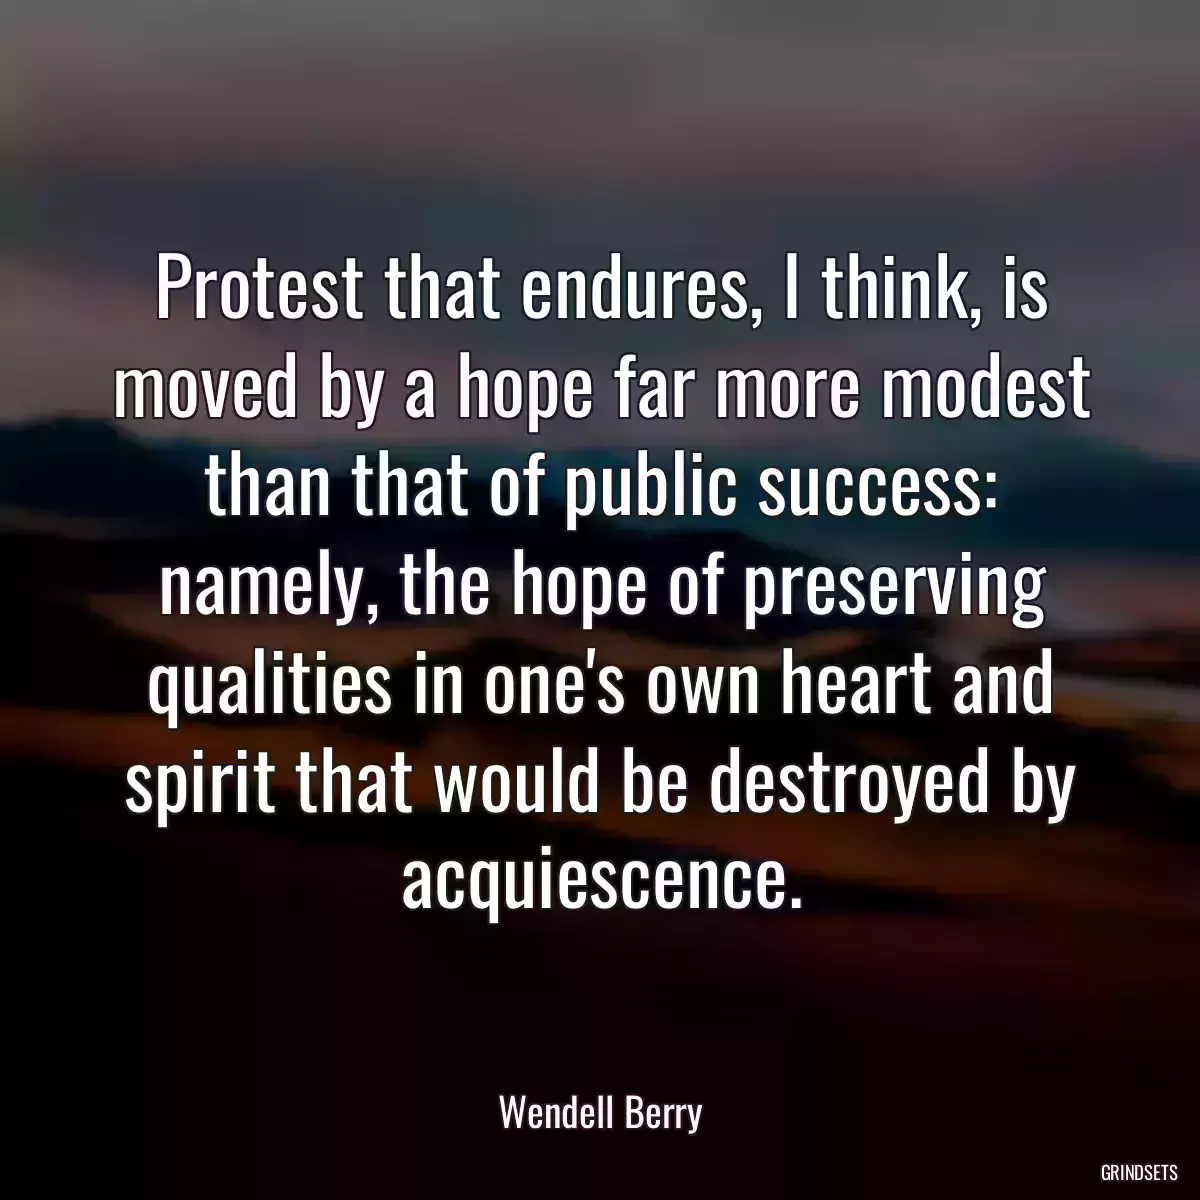 Protest that endures, I think, is moved by a hope far more modest than that of public success: namely, the hope of preserving qualities in one\'s own heart and spirit that would be destroyed by acquiescence.